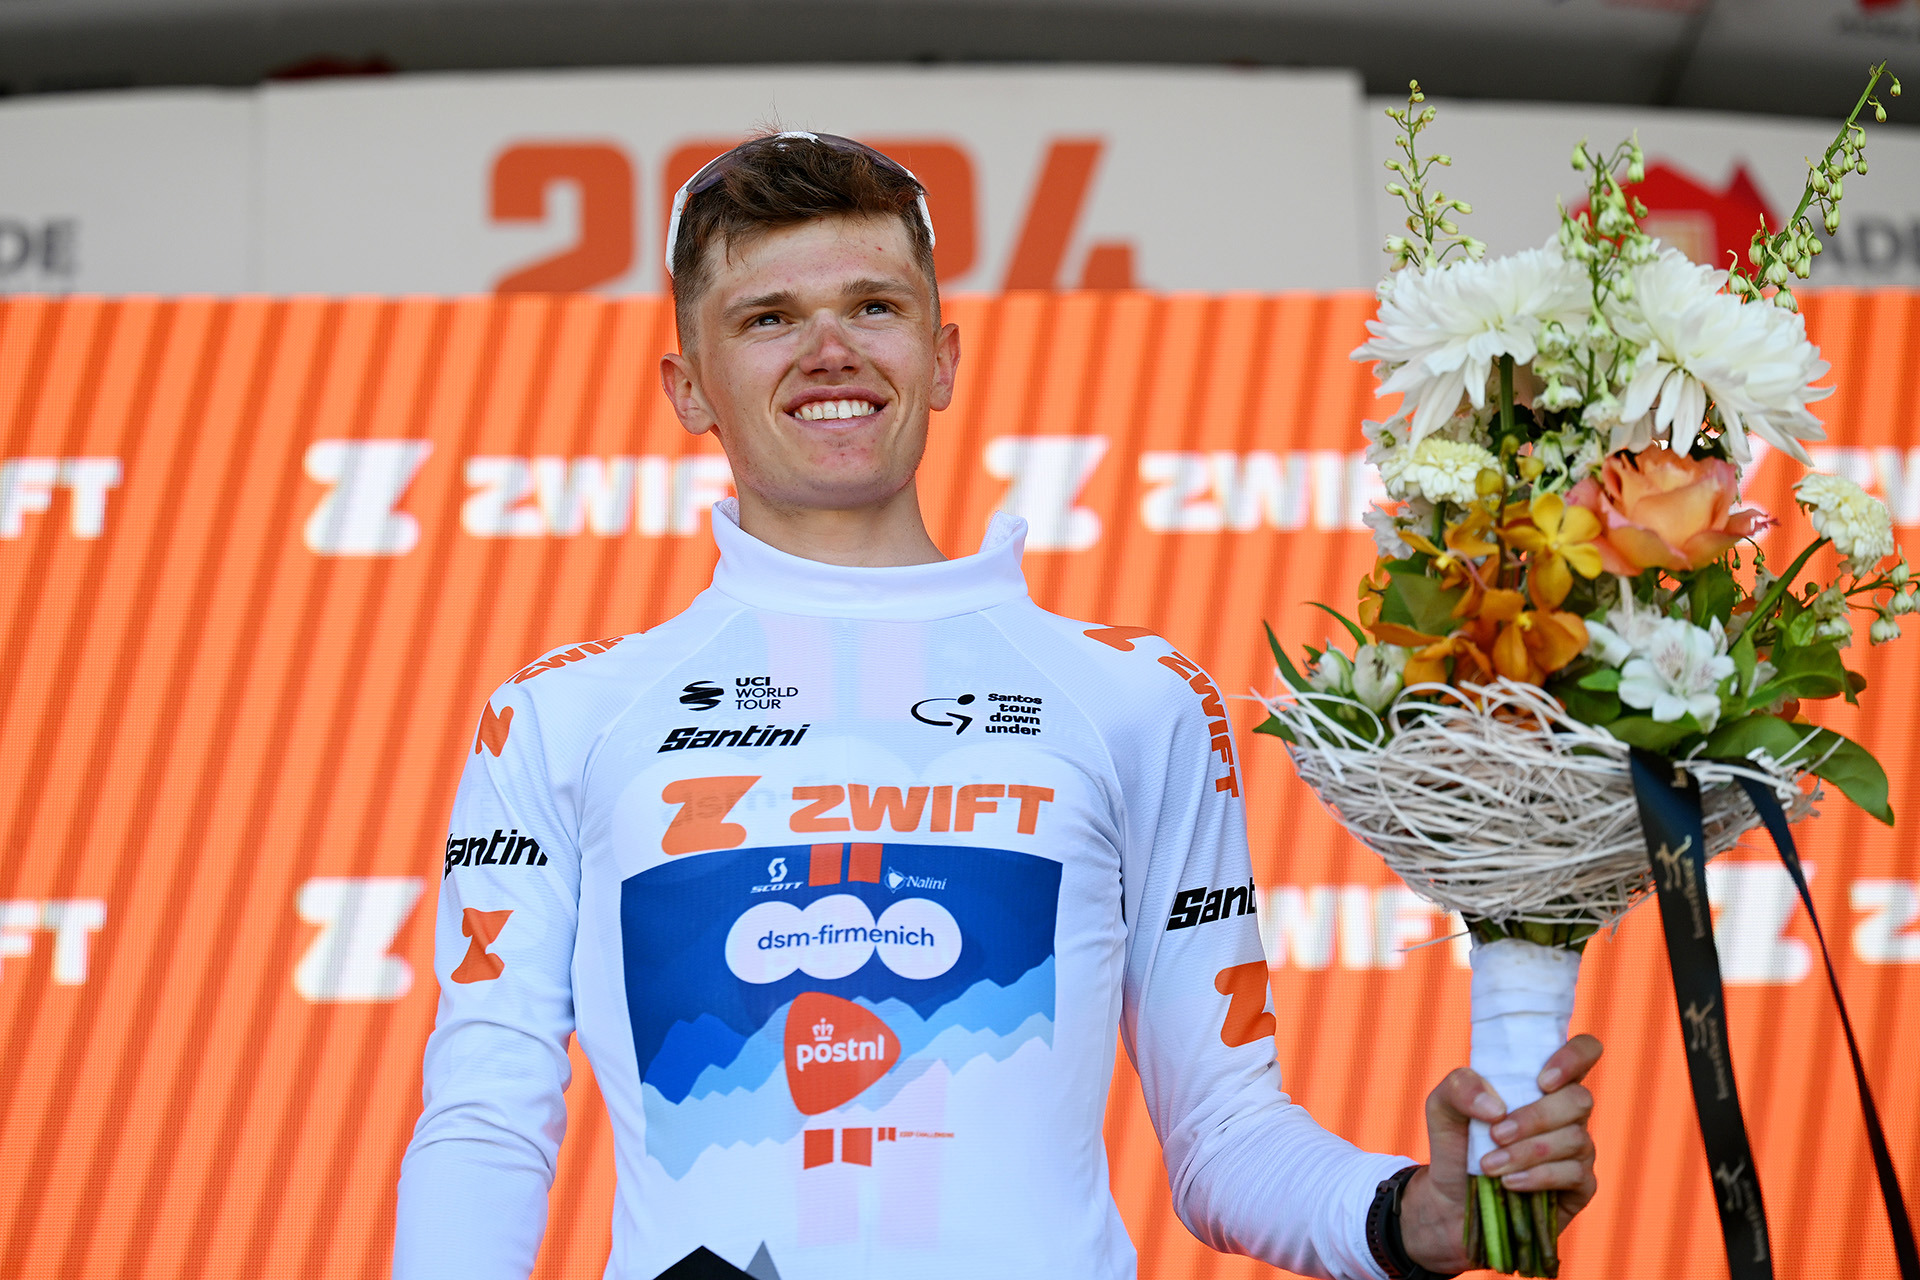 stage 5 tour down under results